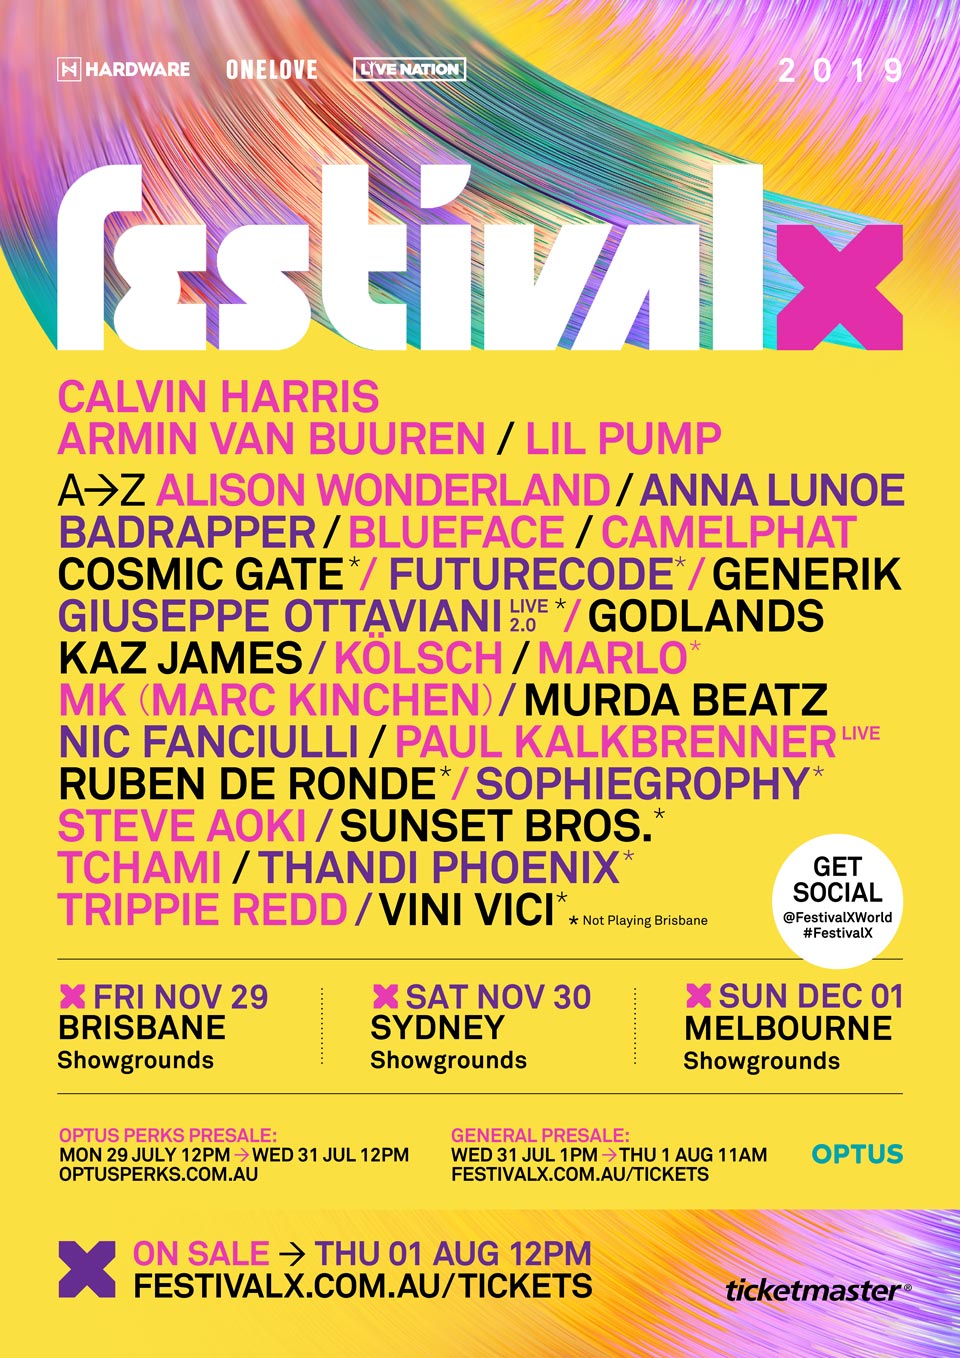 Festival X 2019 launches LINEUP